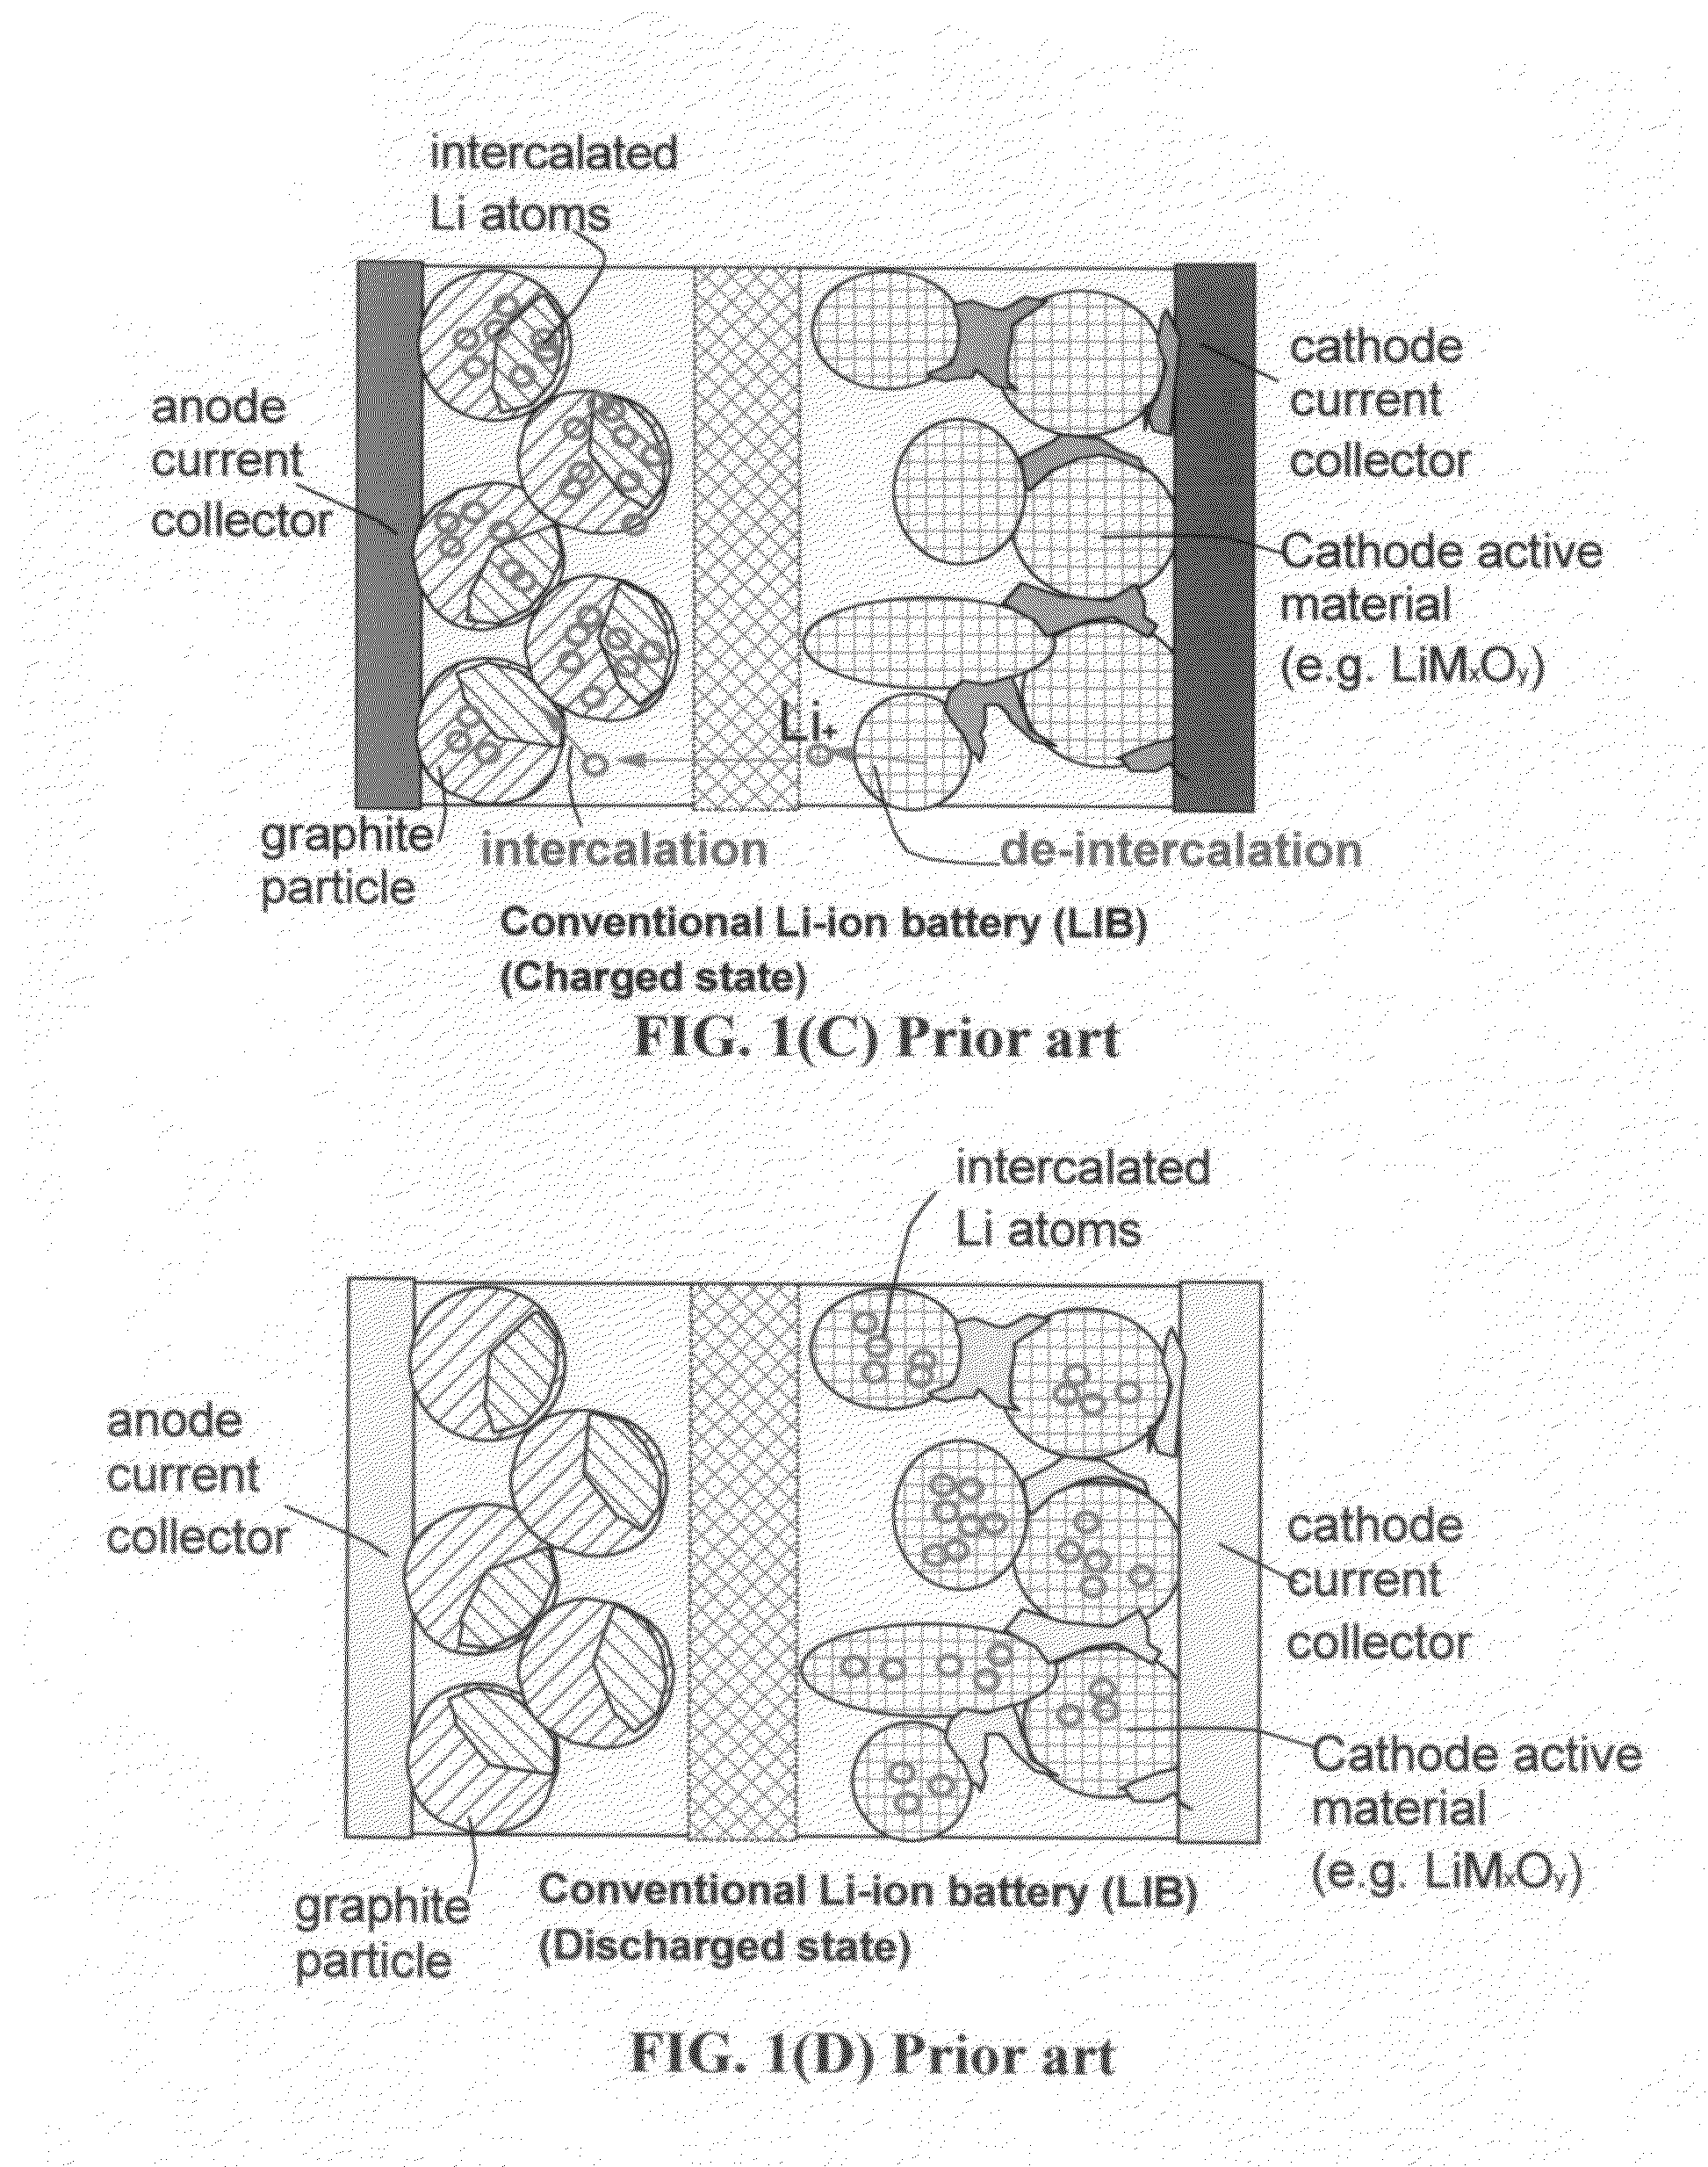 Surface-mediated cell-driven power tools and methods of operating same